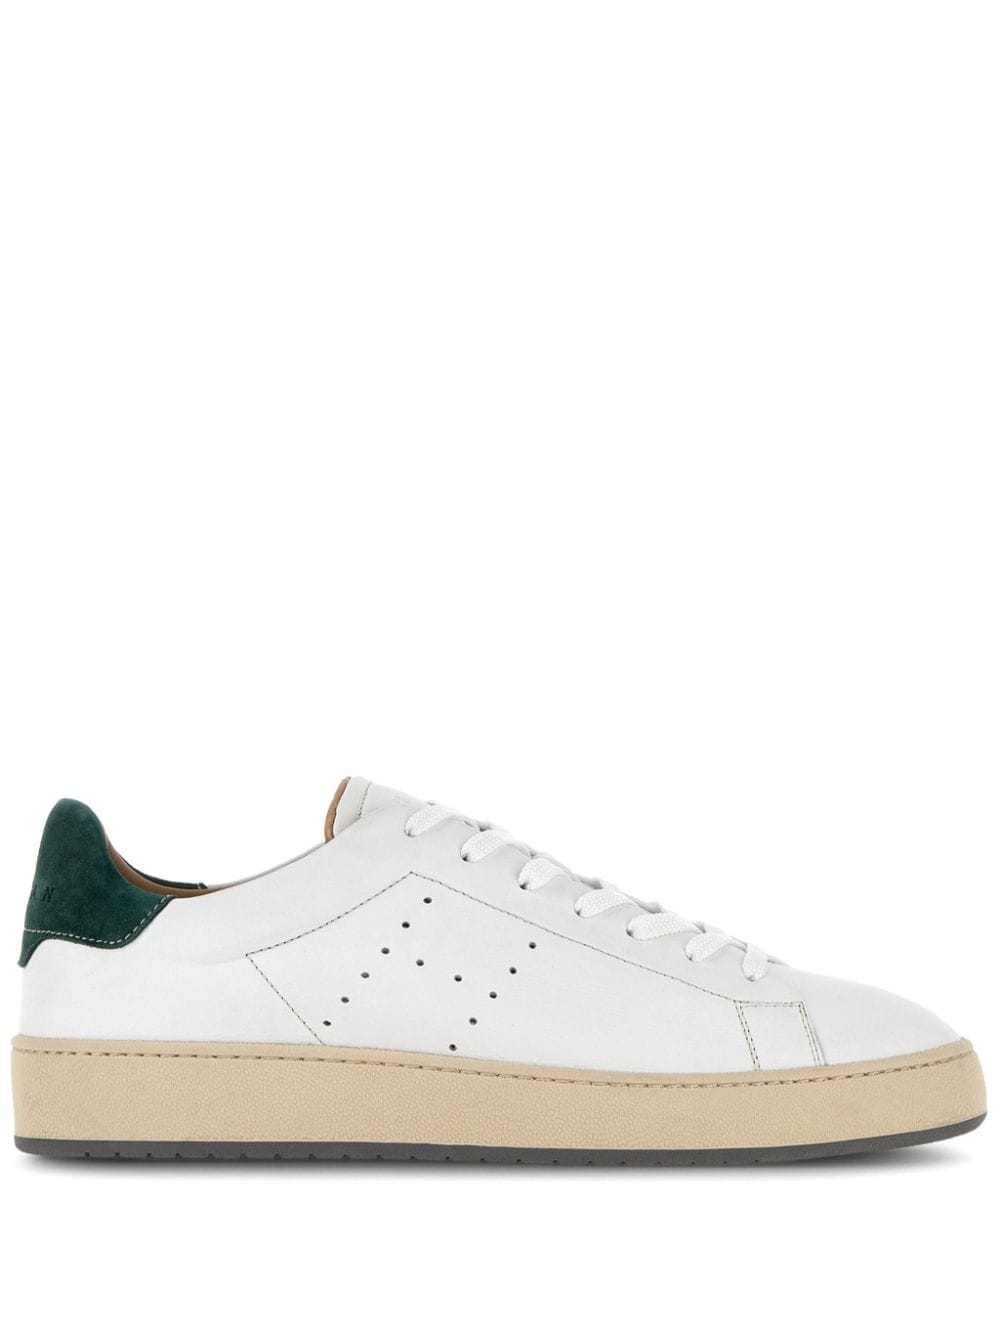 Hogan H672 Leather Low-top Sneakers In White